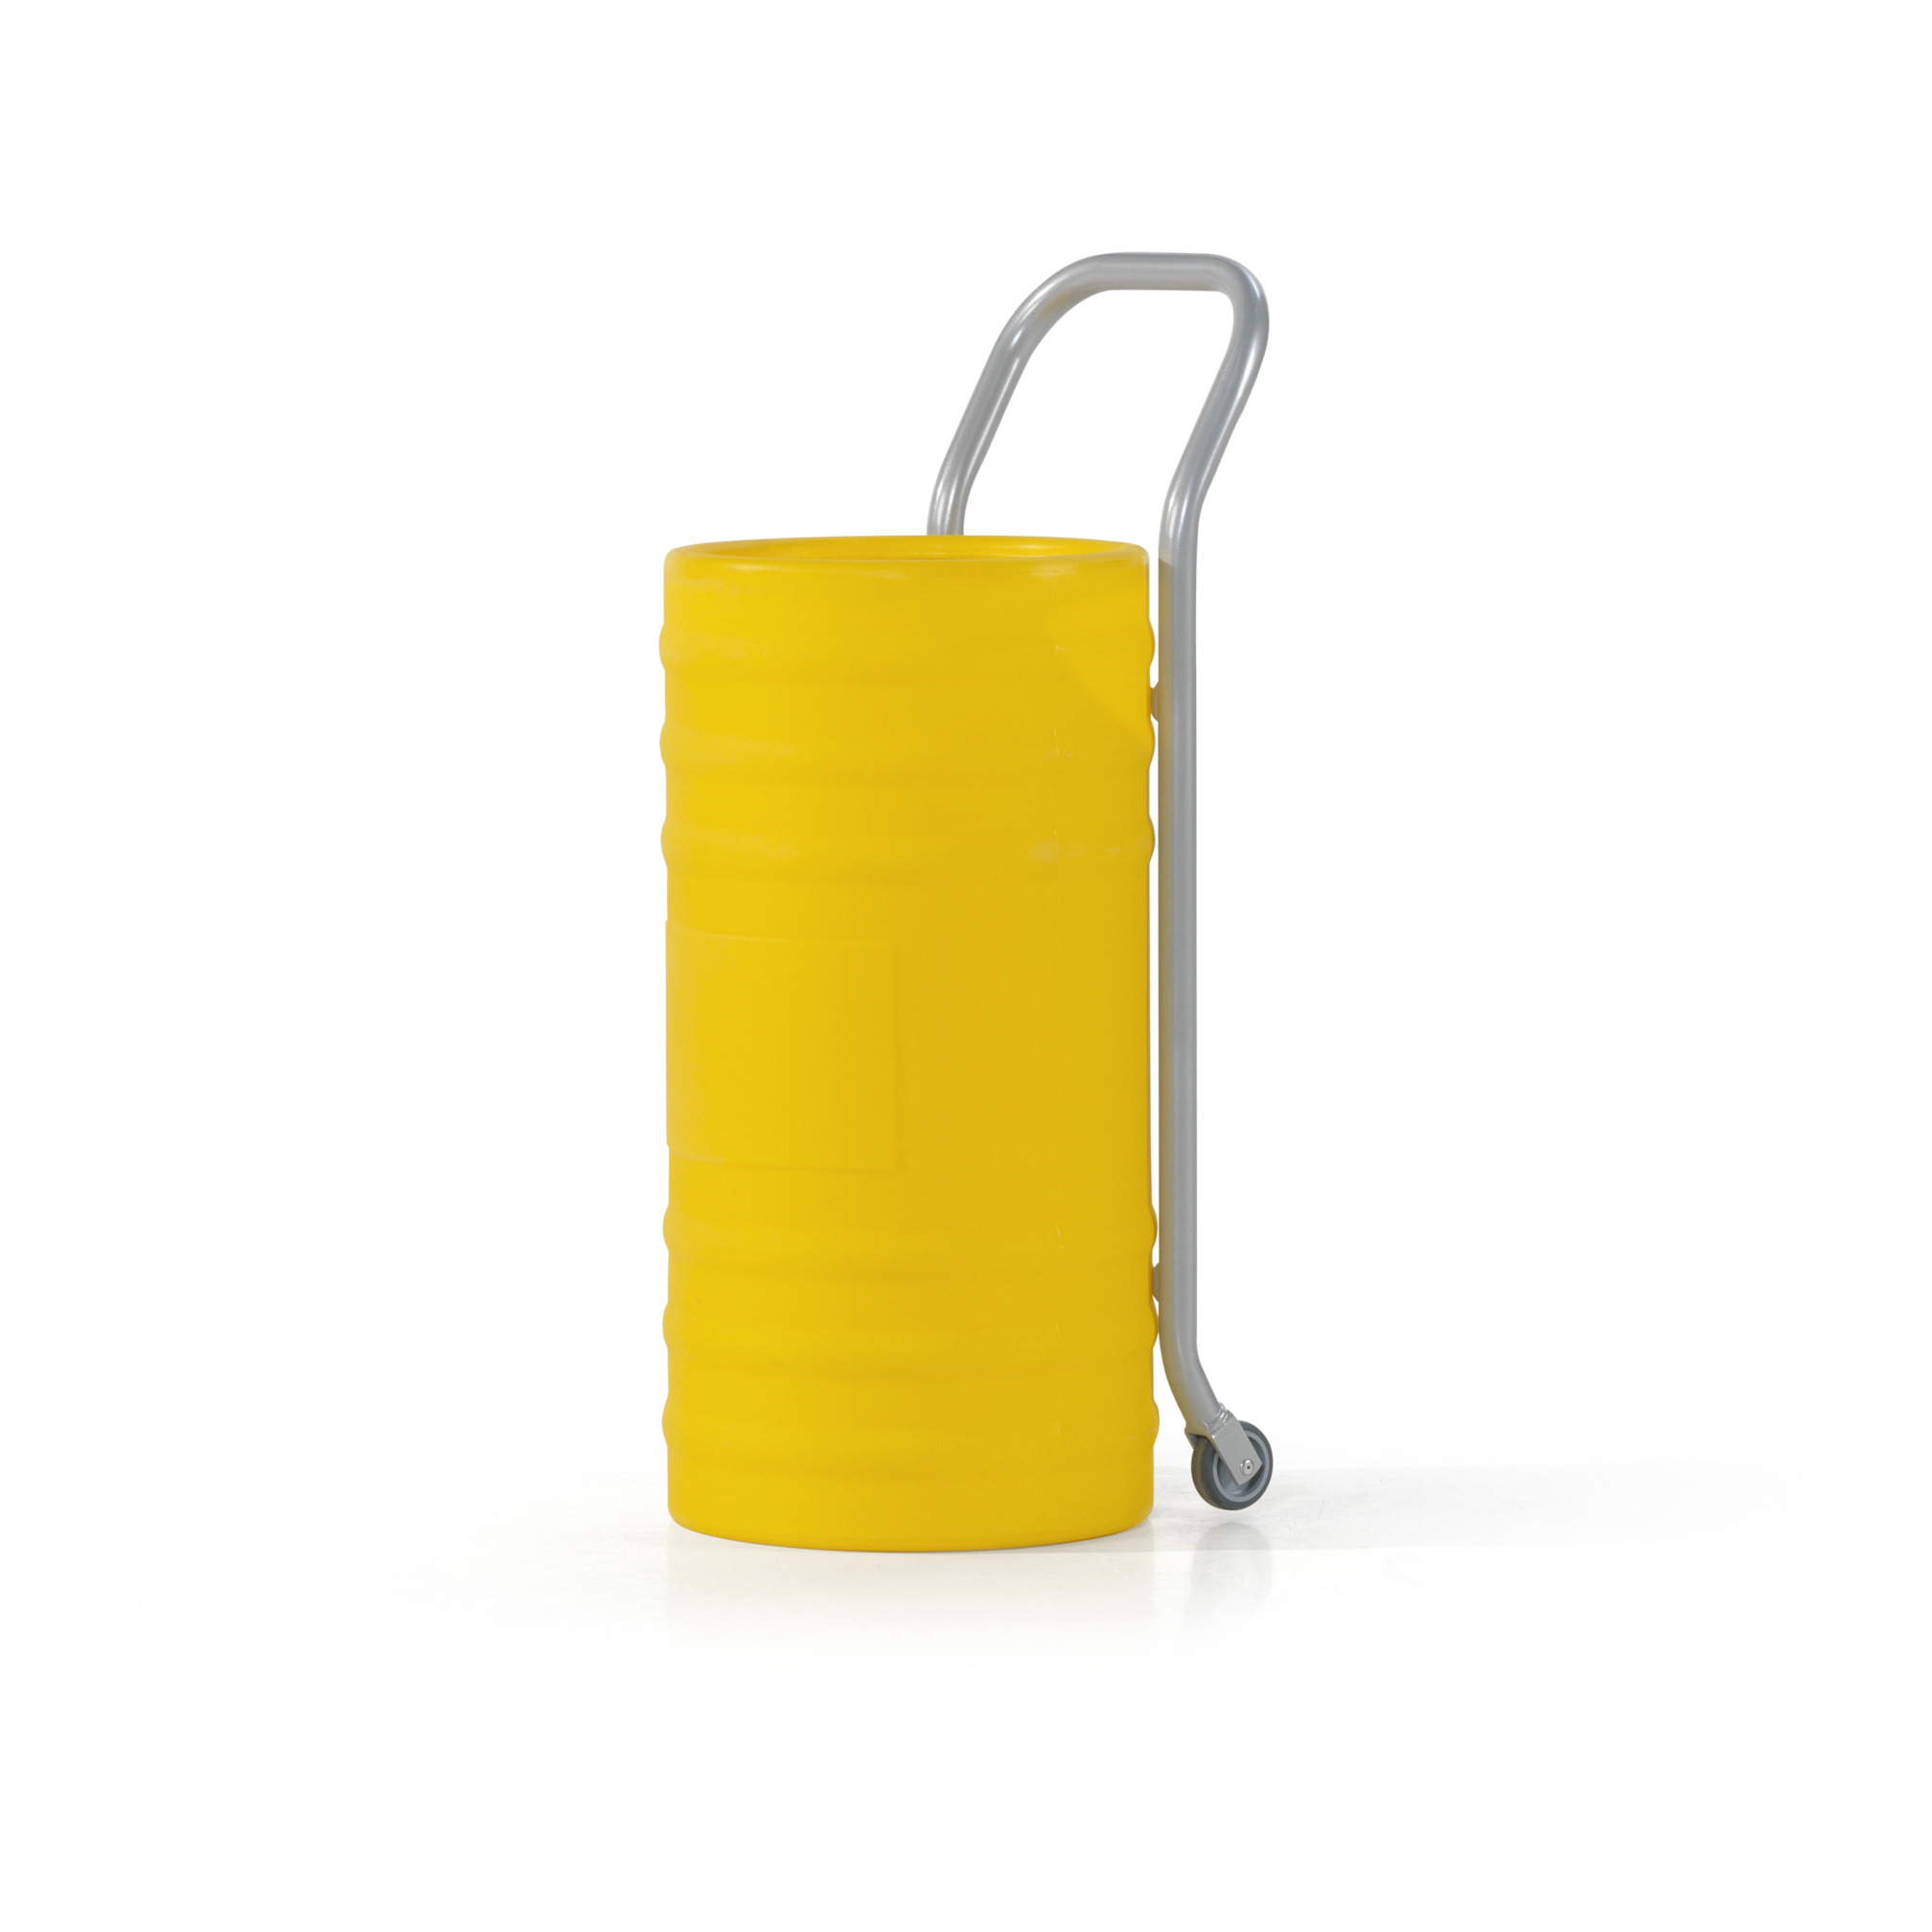 Stick and pole container